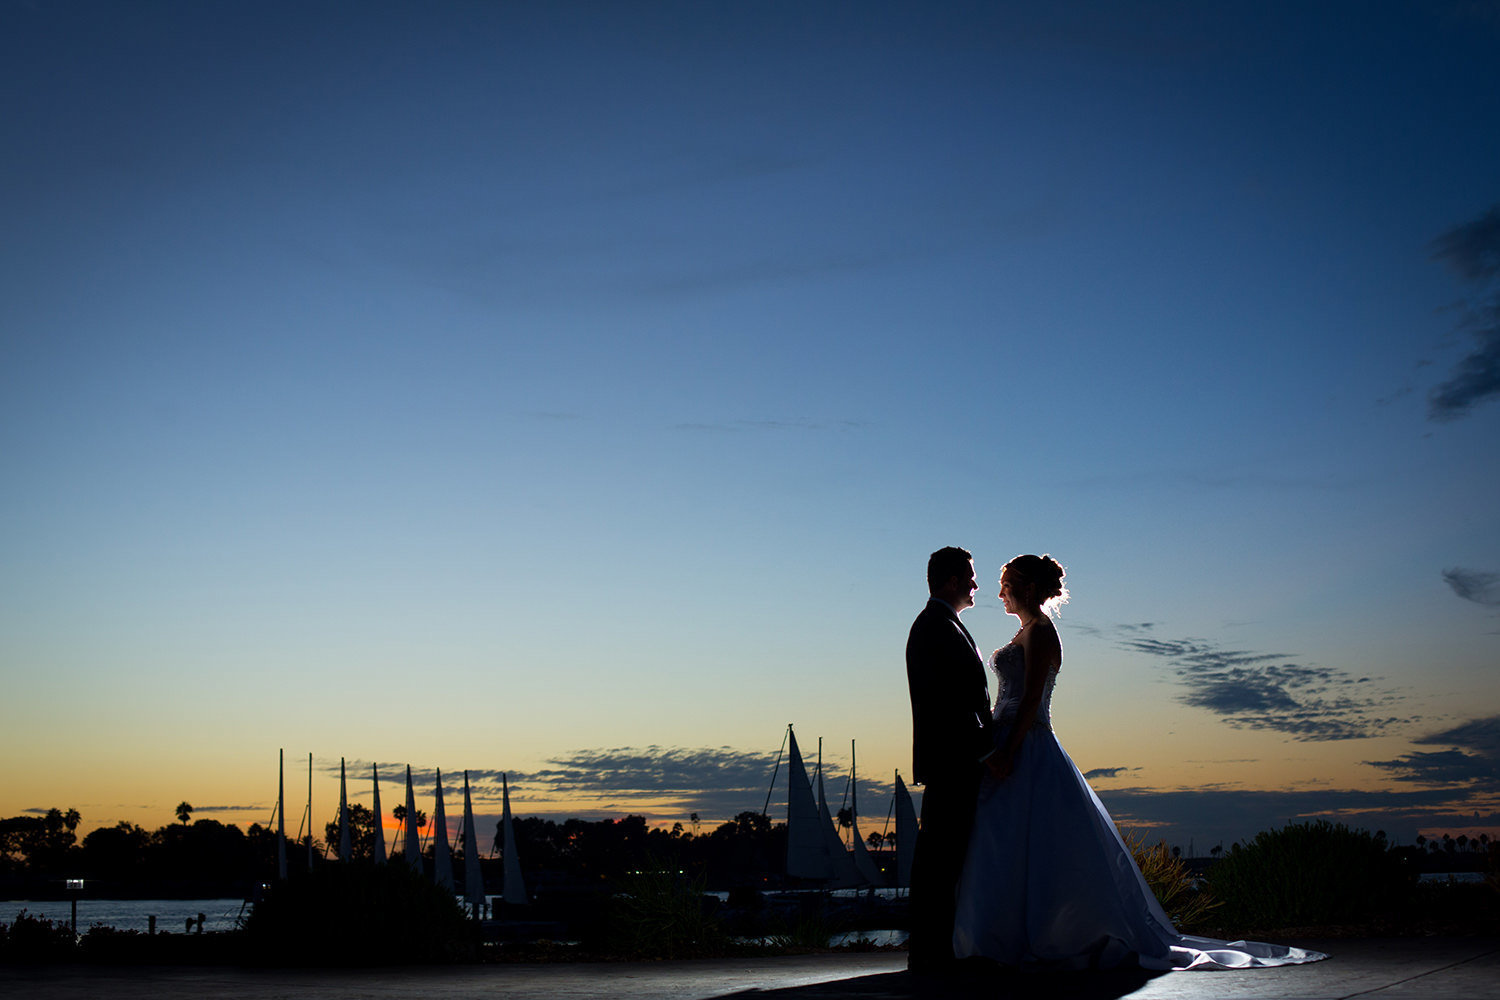 sunset image with bride and groom